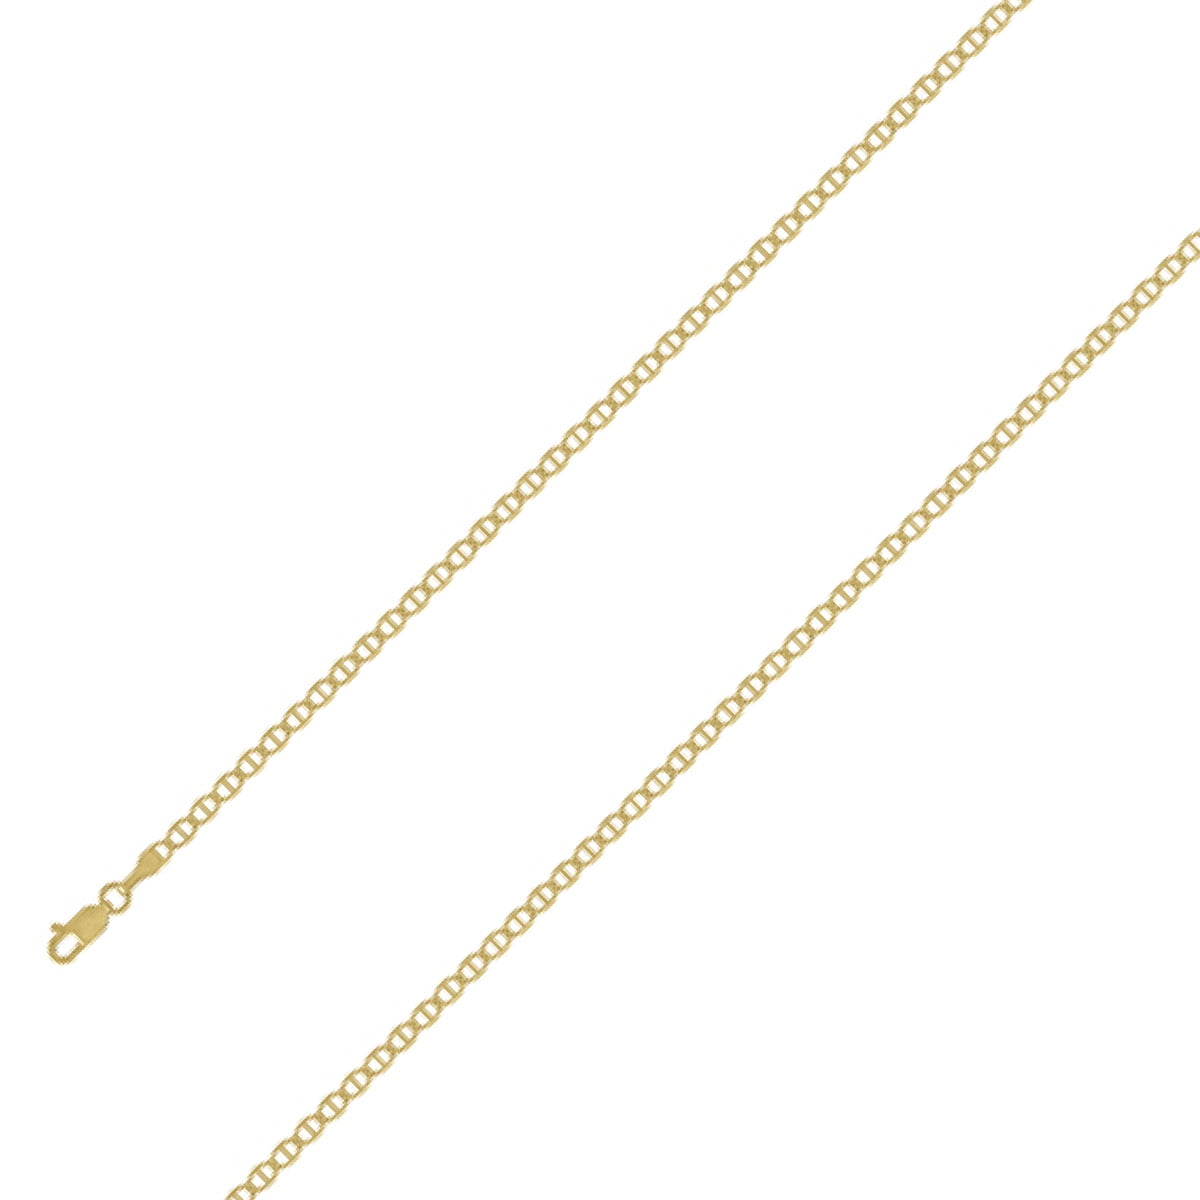 Real 10k Yellow Gold Mariner Necklace Chain 3.1 mm 18'' 18 inch Men Women Gifts